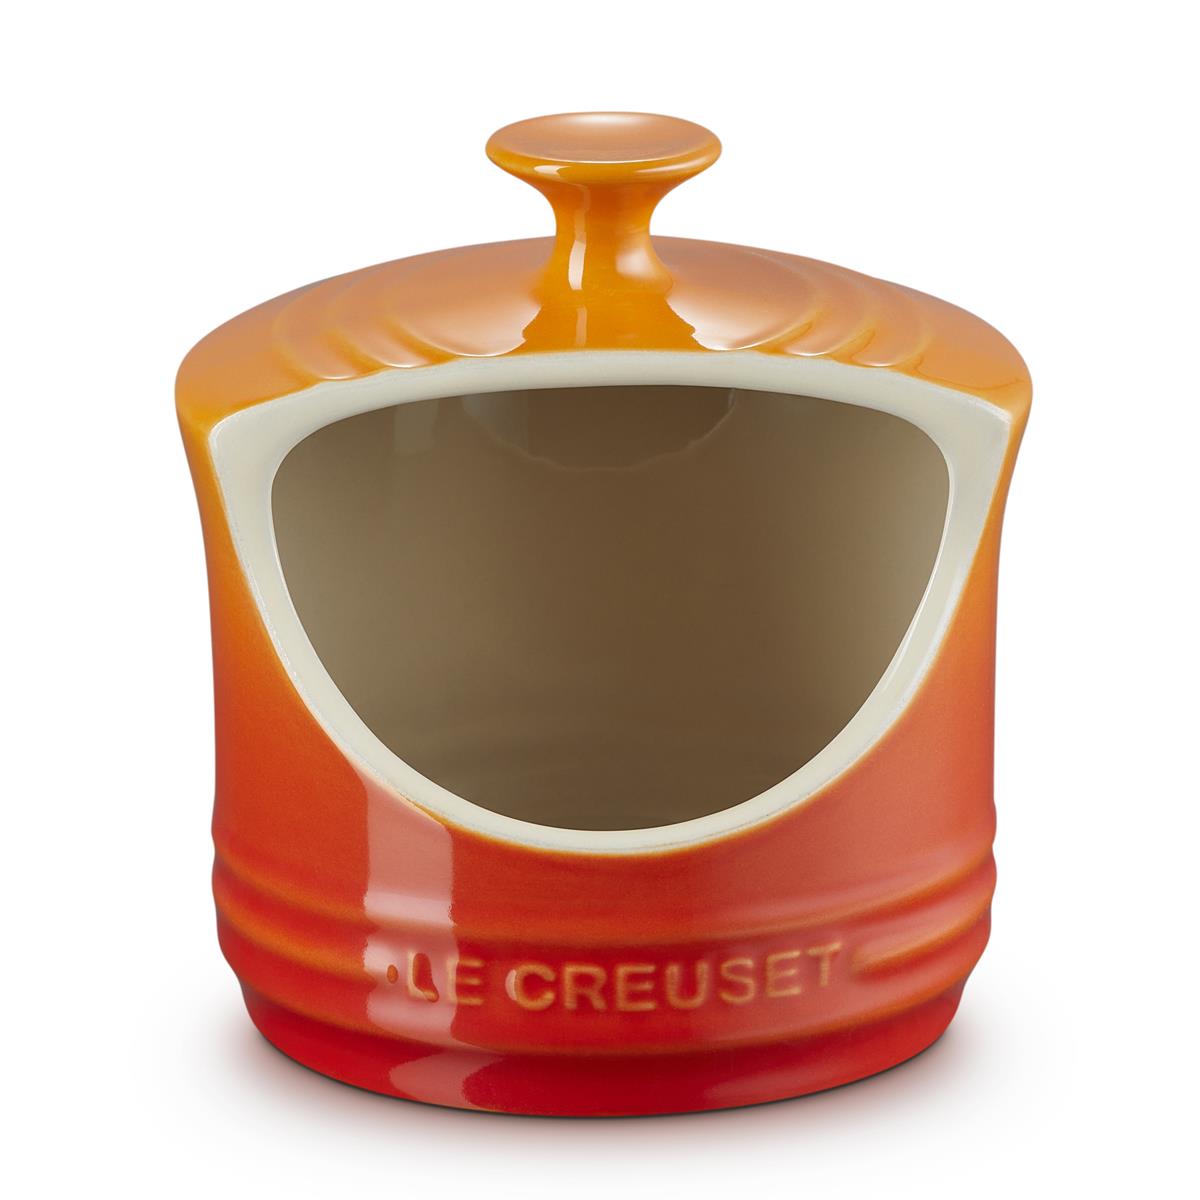 What features does the Le Creuset Salt Pig offer?